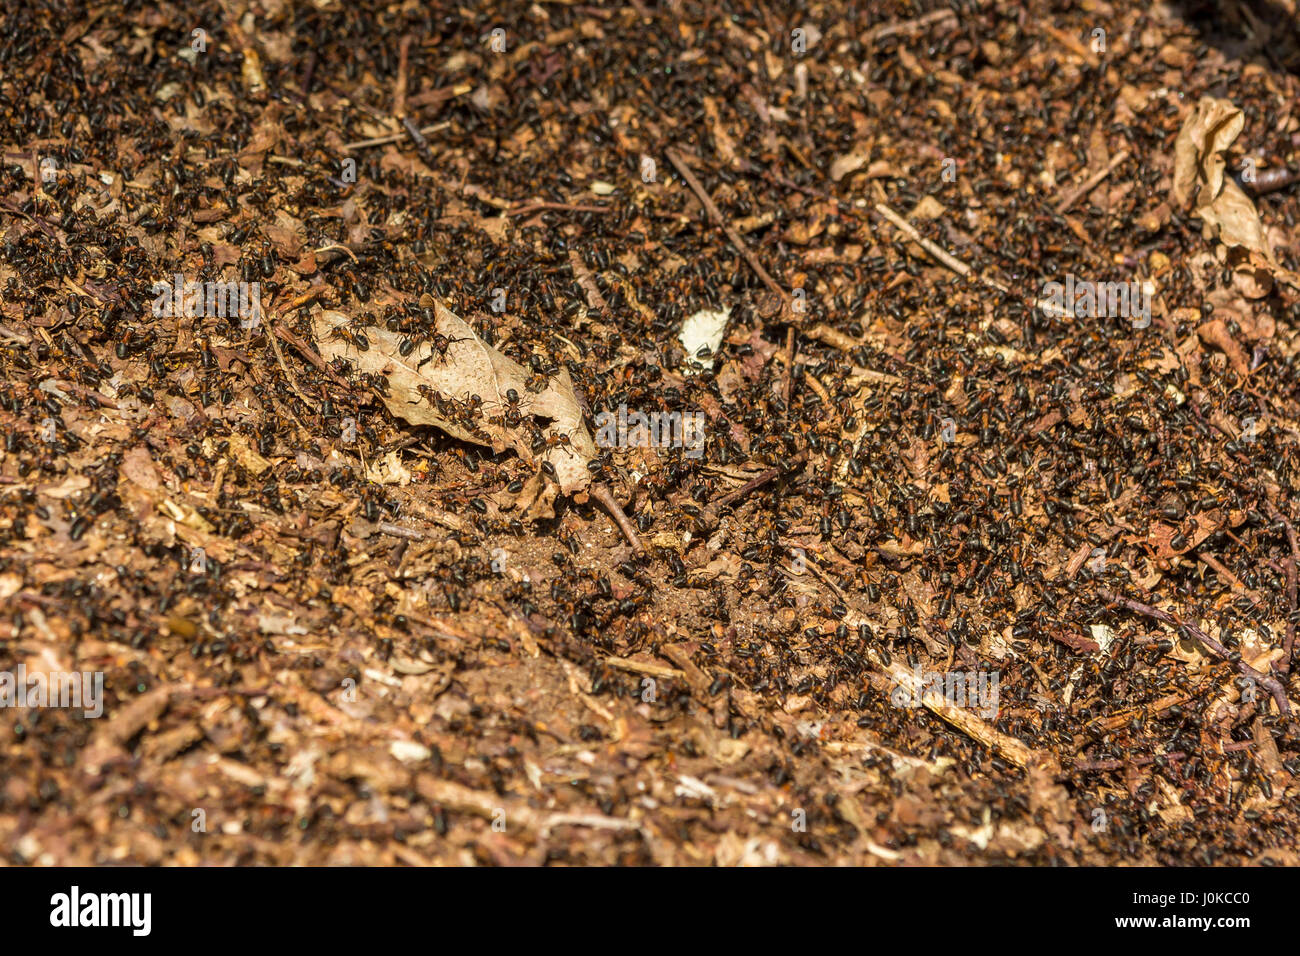 European red ants swarming on forest floor Stock Photo